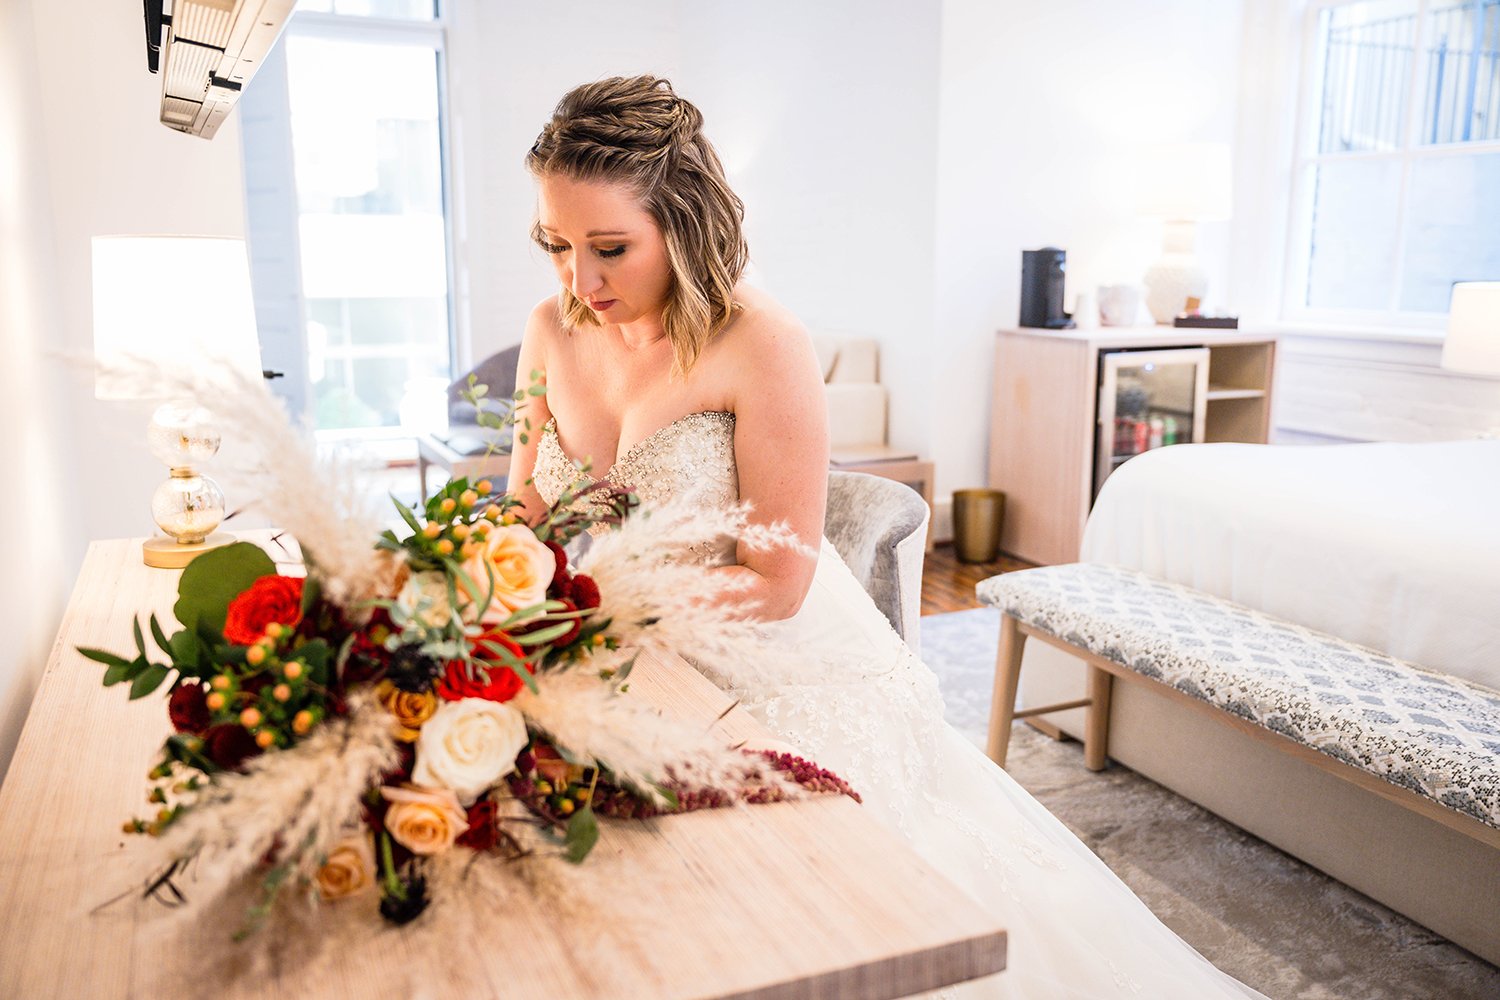 A marrier sits at a desk and writes her vows in a hotel room at Fire Station One.